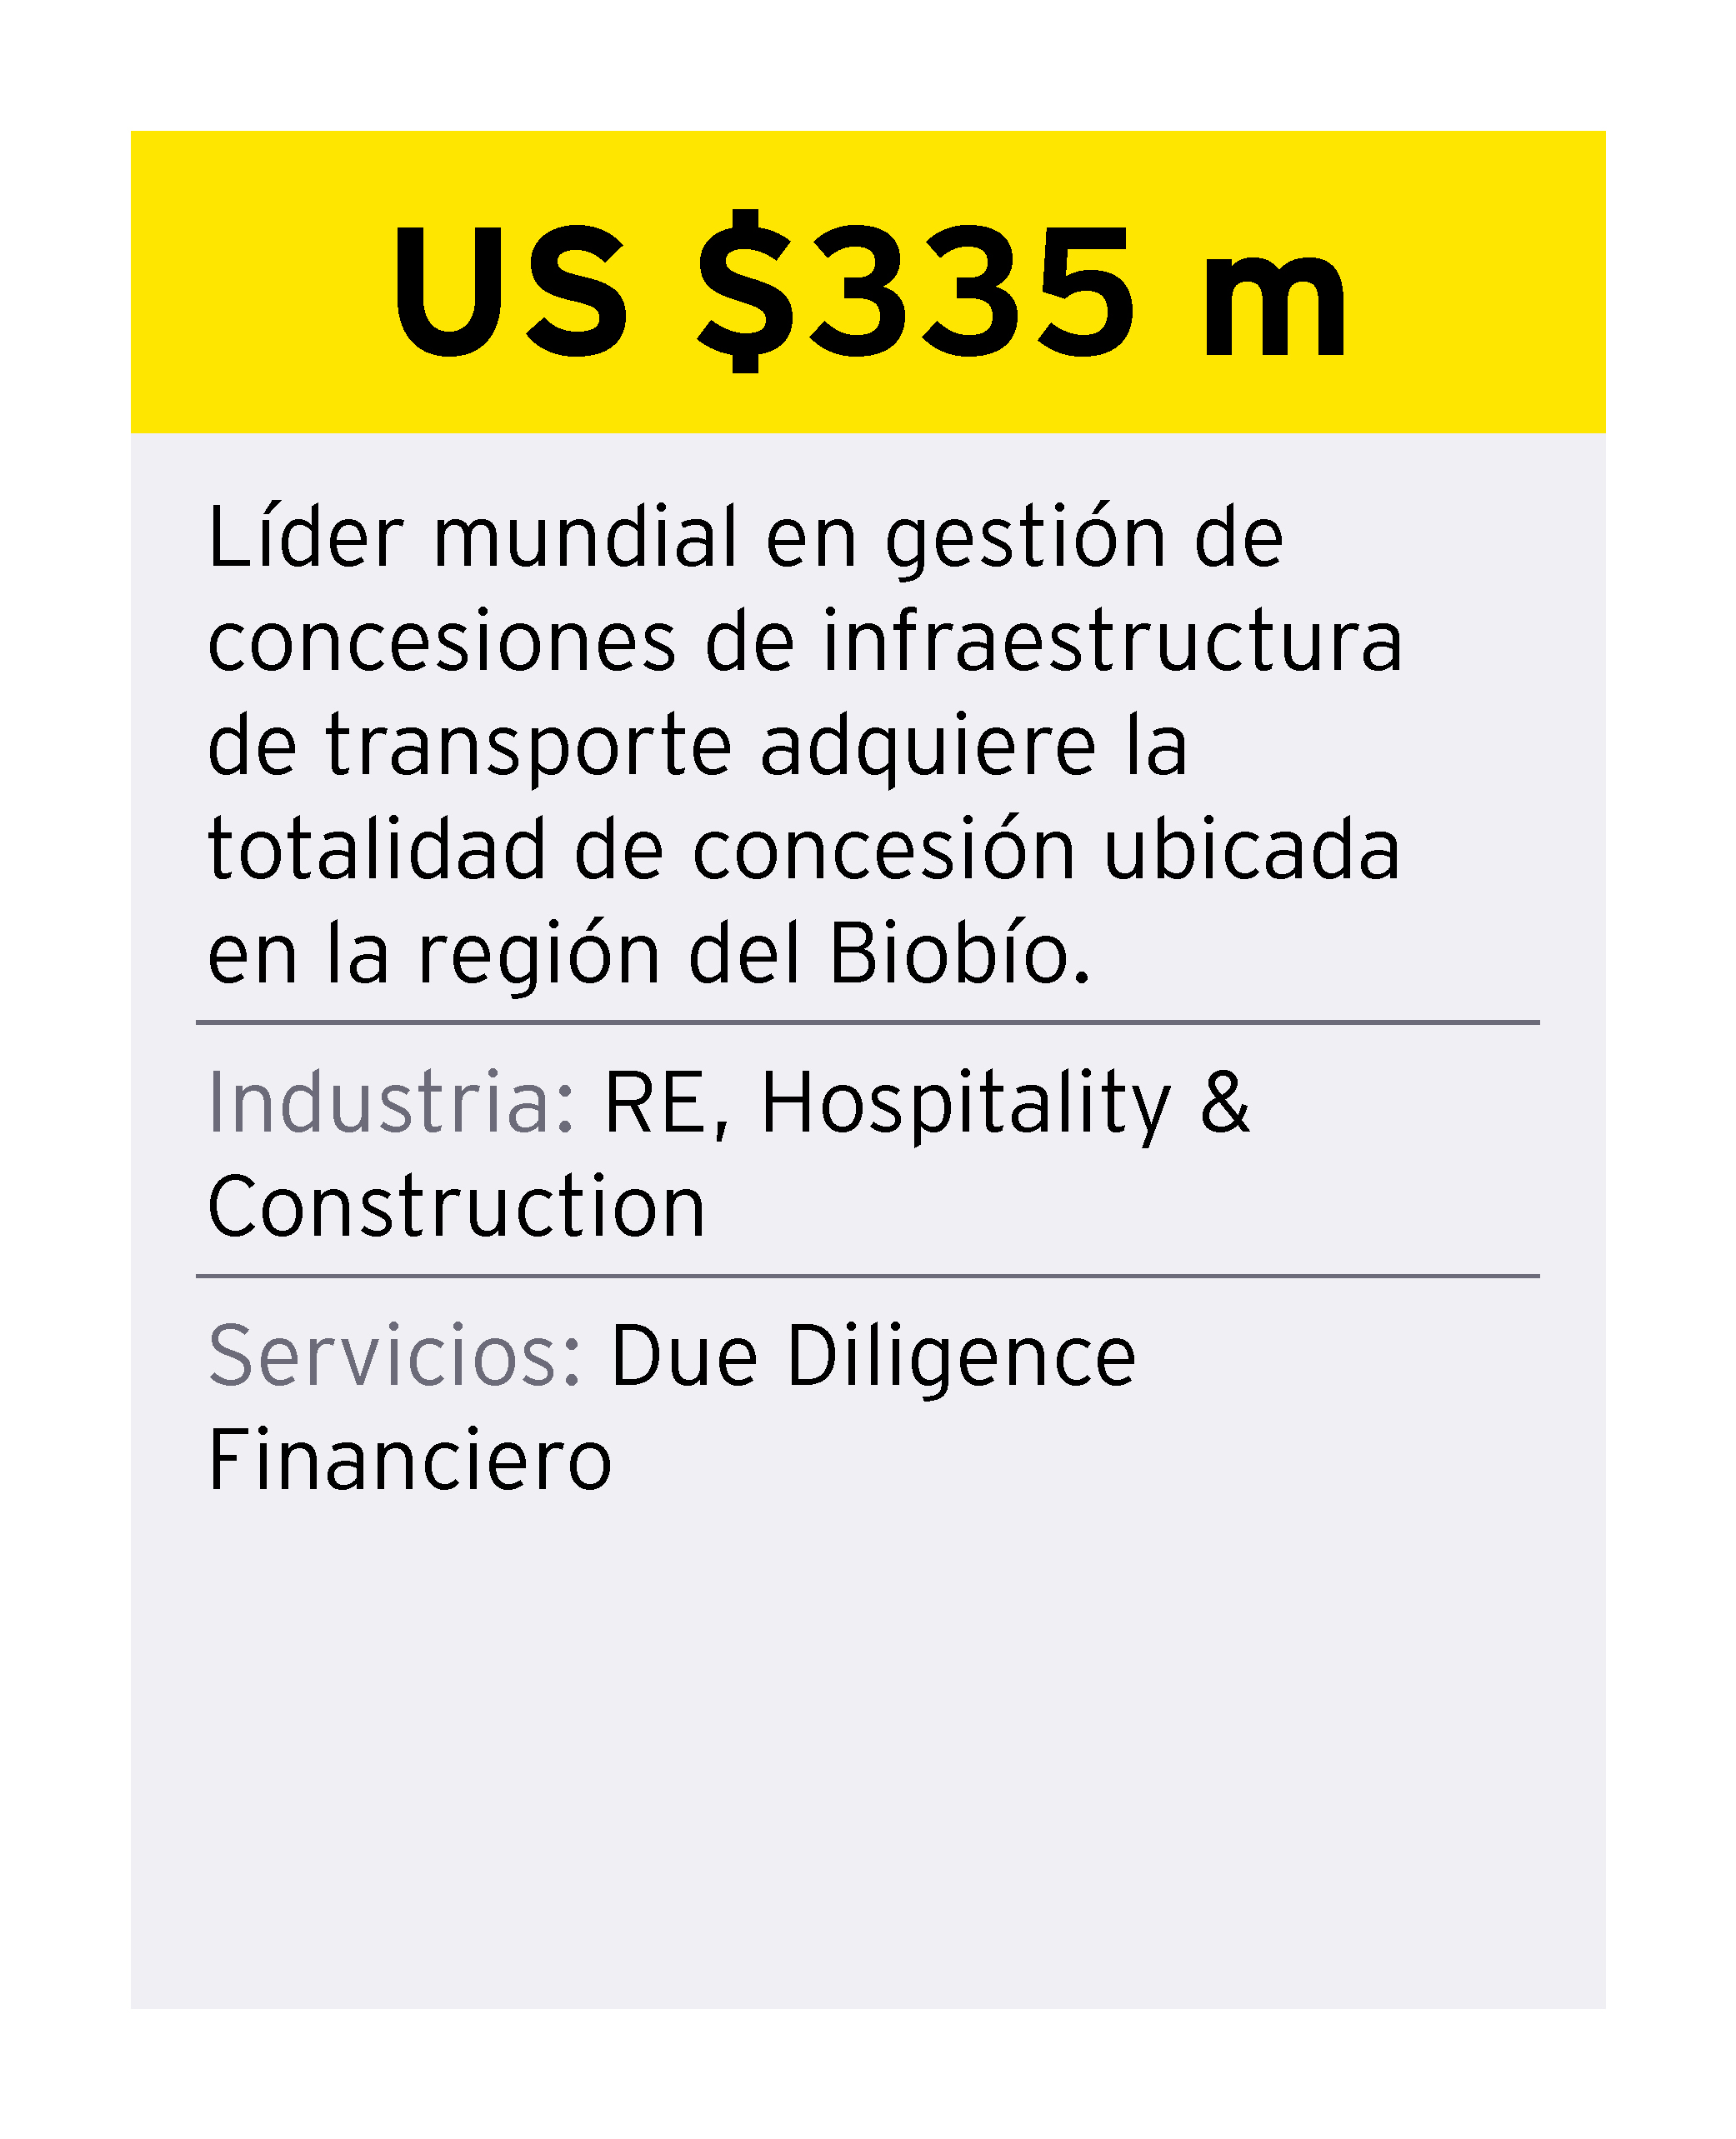 ey-chile-credencial-1-real-estate-hospitality-construction